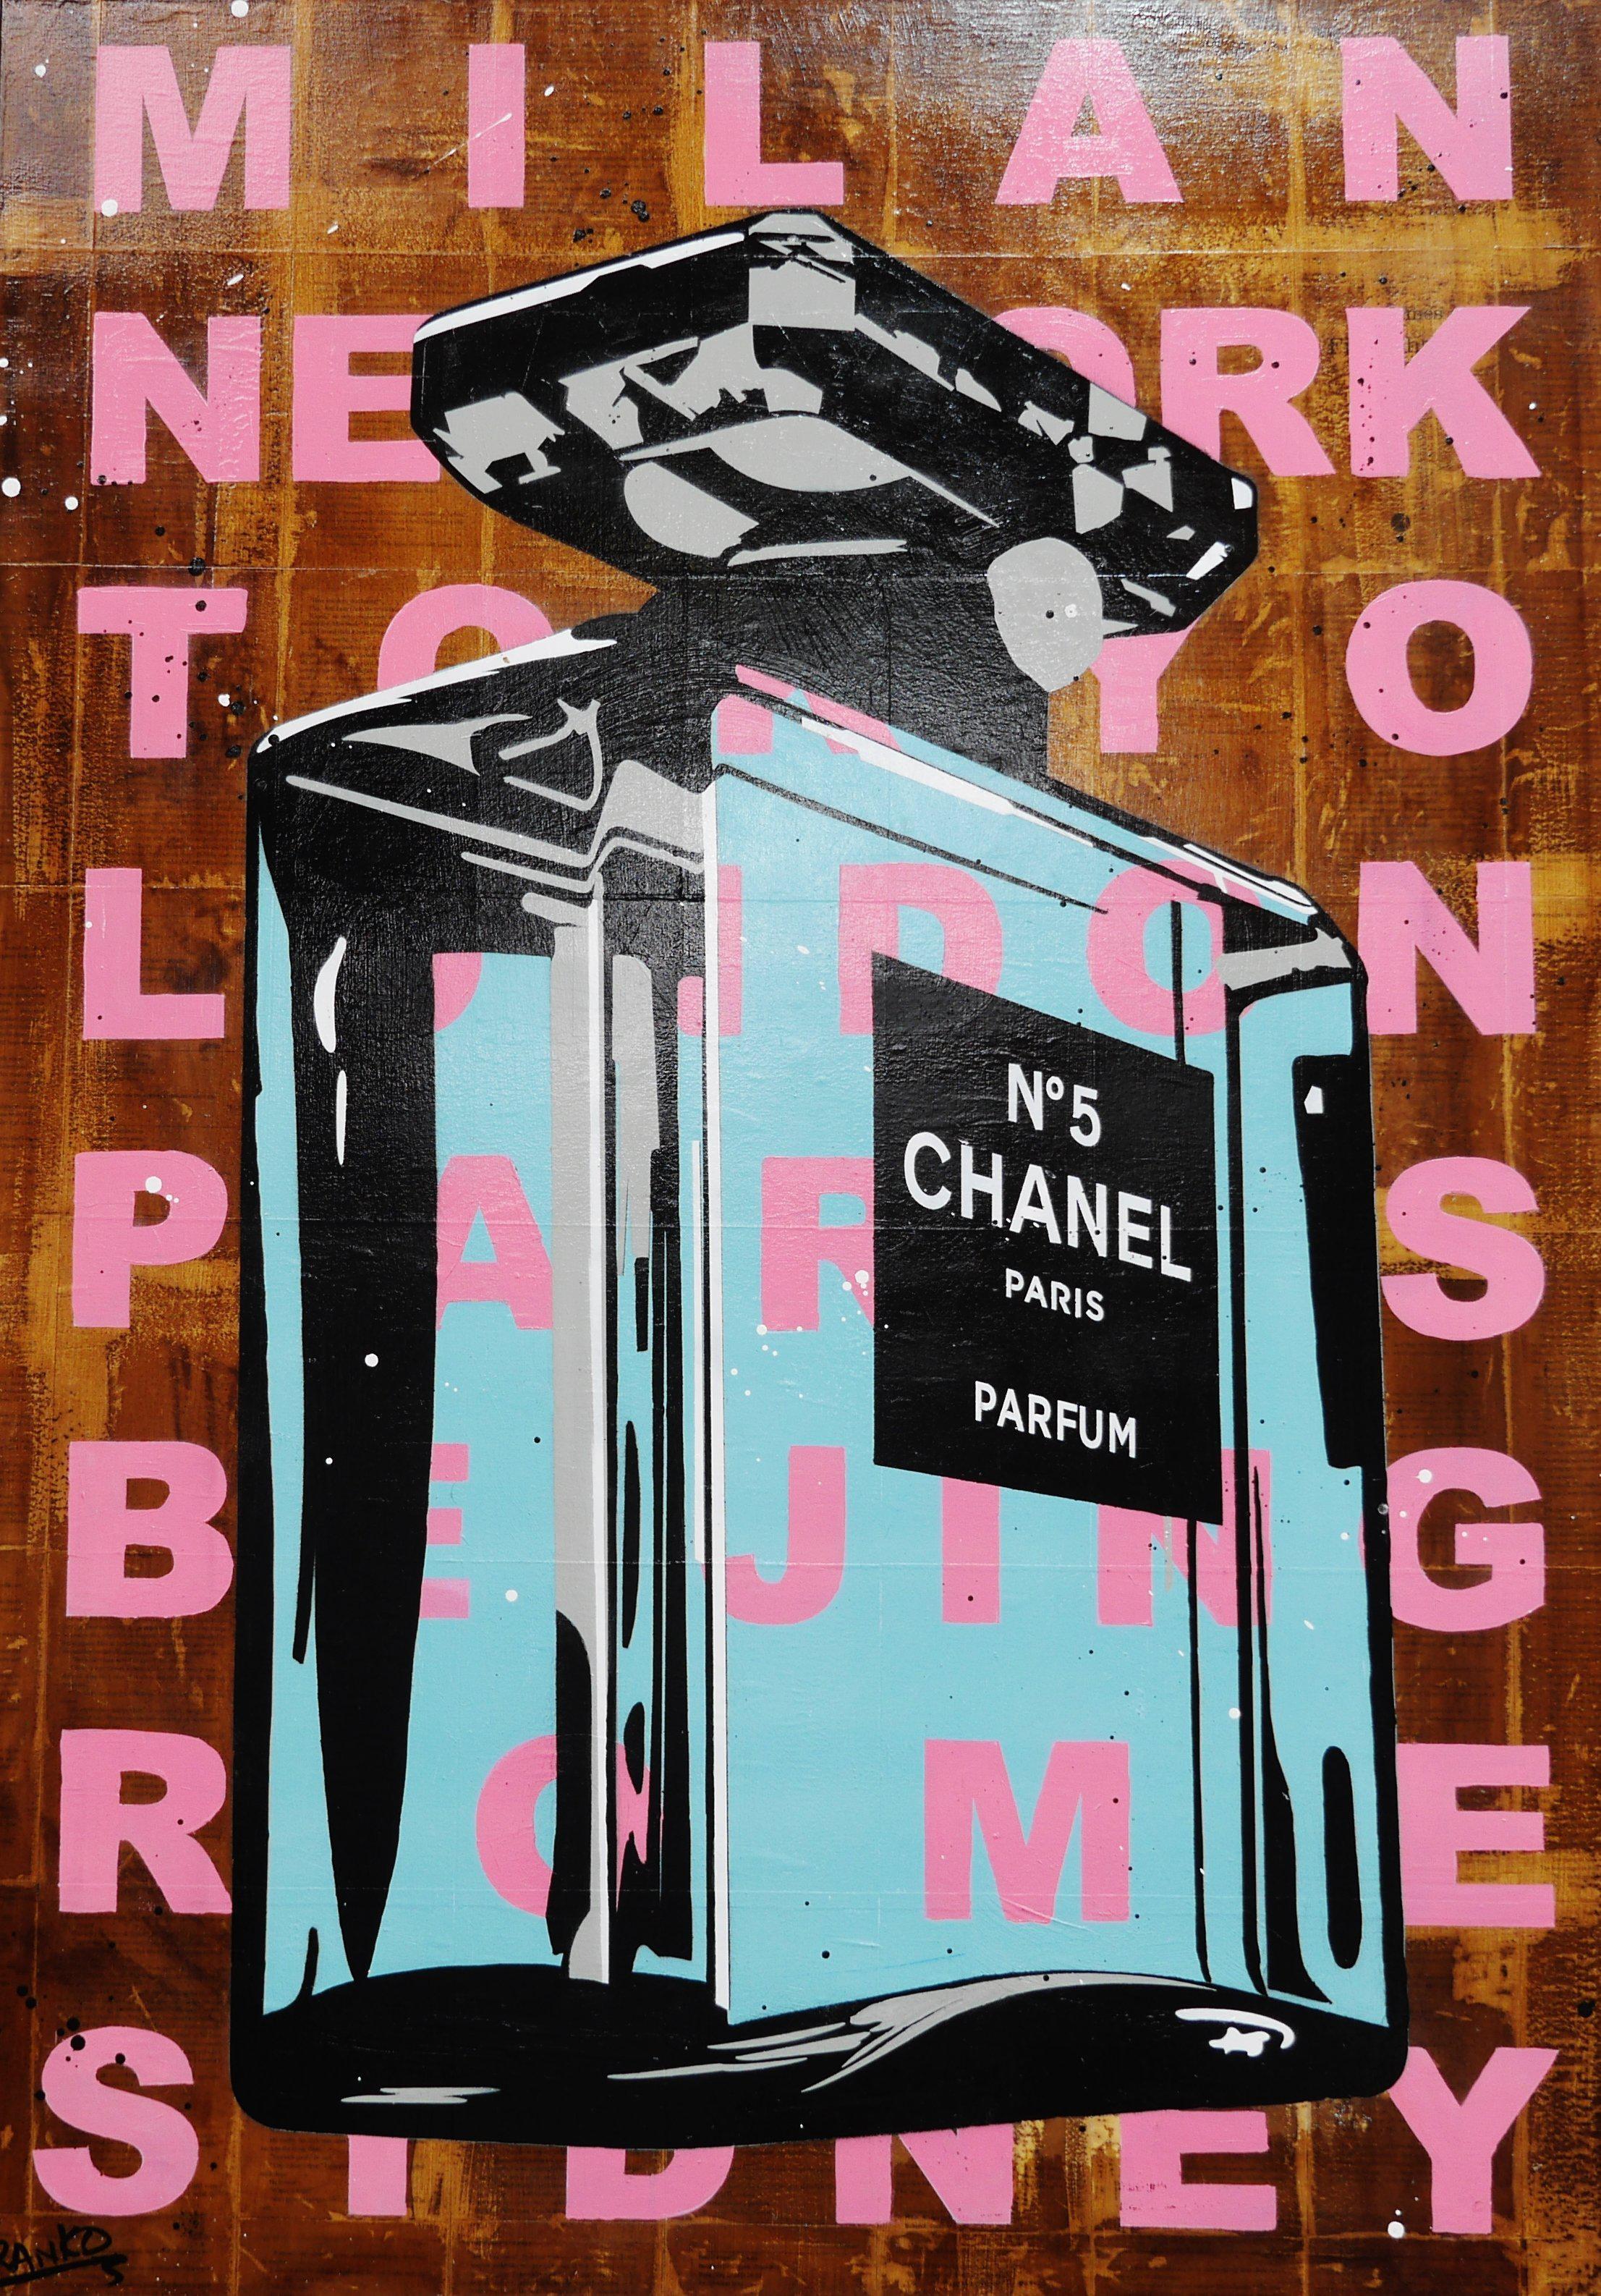 50 Shades of Chanel 140cm x 100cm Chanel Perfume Bottle Vintage Book Pop art Painting (SOLD)-Abstract-Franko-[Franko]-[Australia_Art]-[Art_Lovers_Australia]-Franklin Art Studio